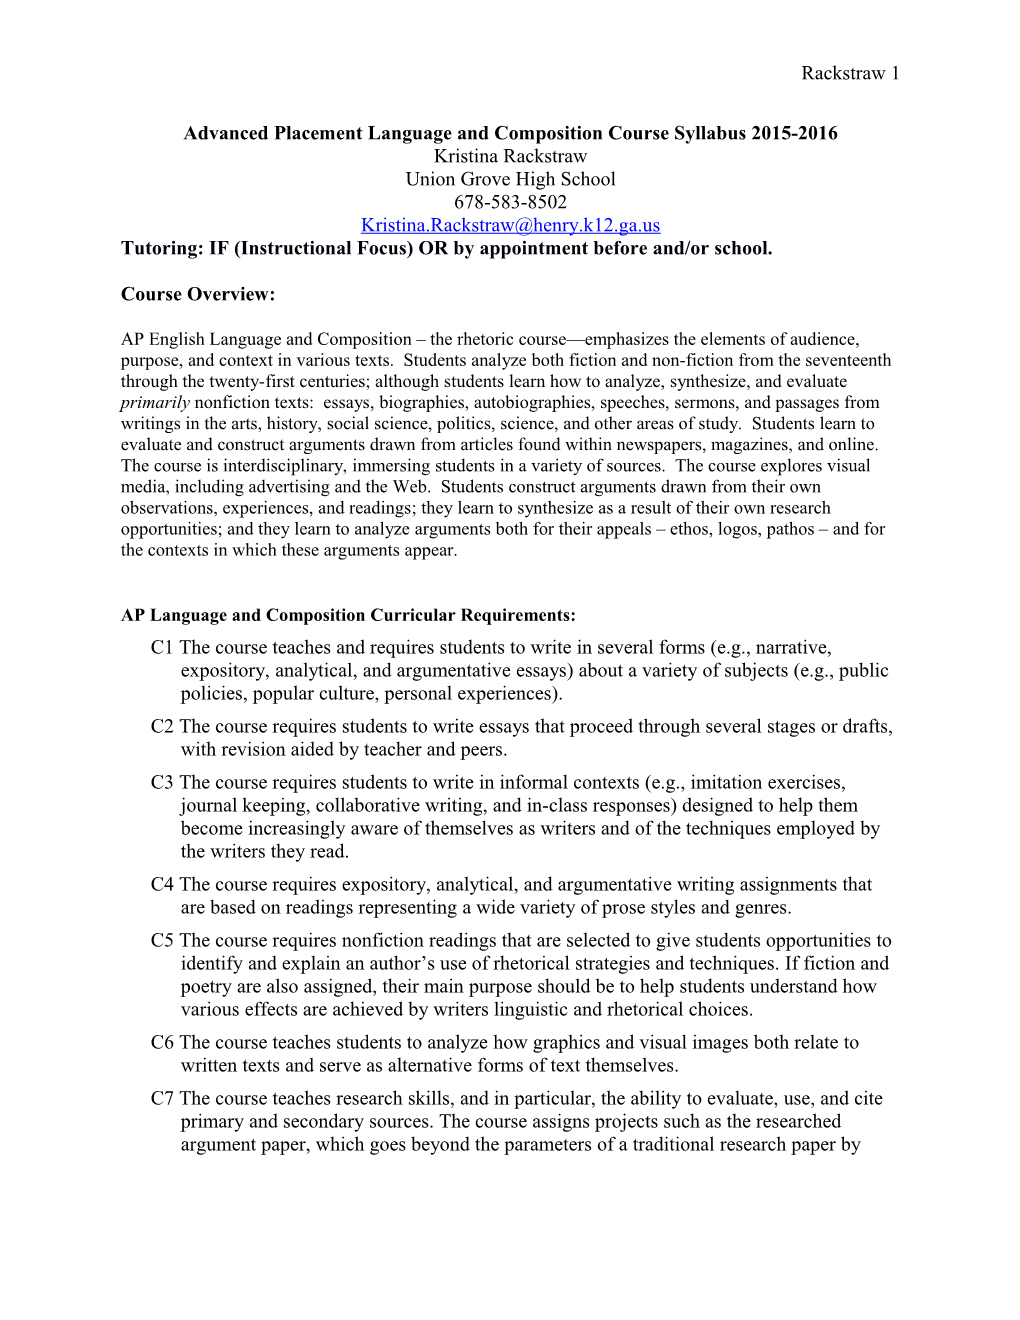 Advanced Placement Language and Composition Course Syllabus 2015-2016